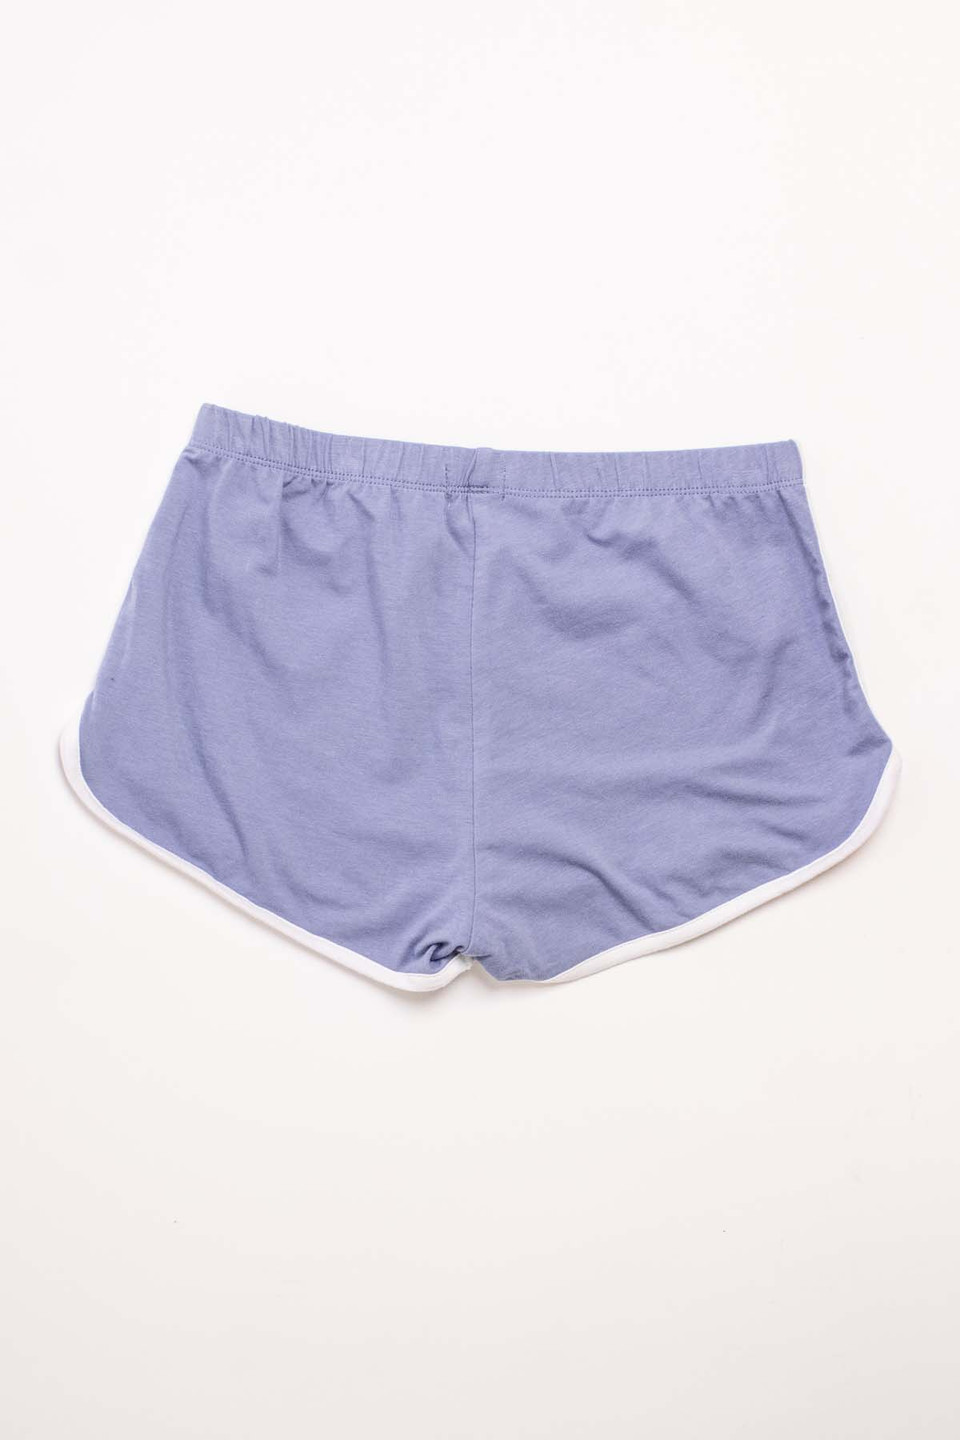 Tempest Blue Athletic Dolphin Shorts - Ragstock.com